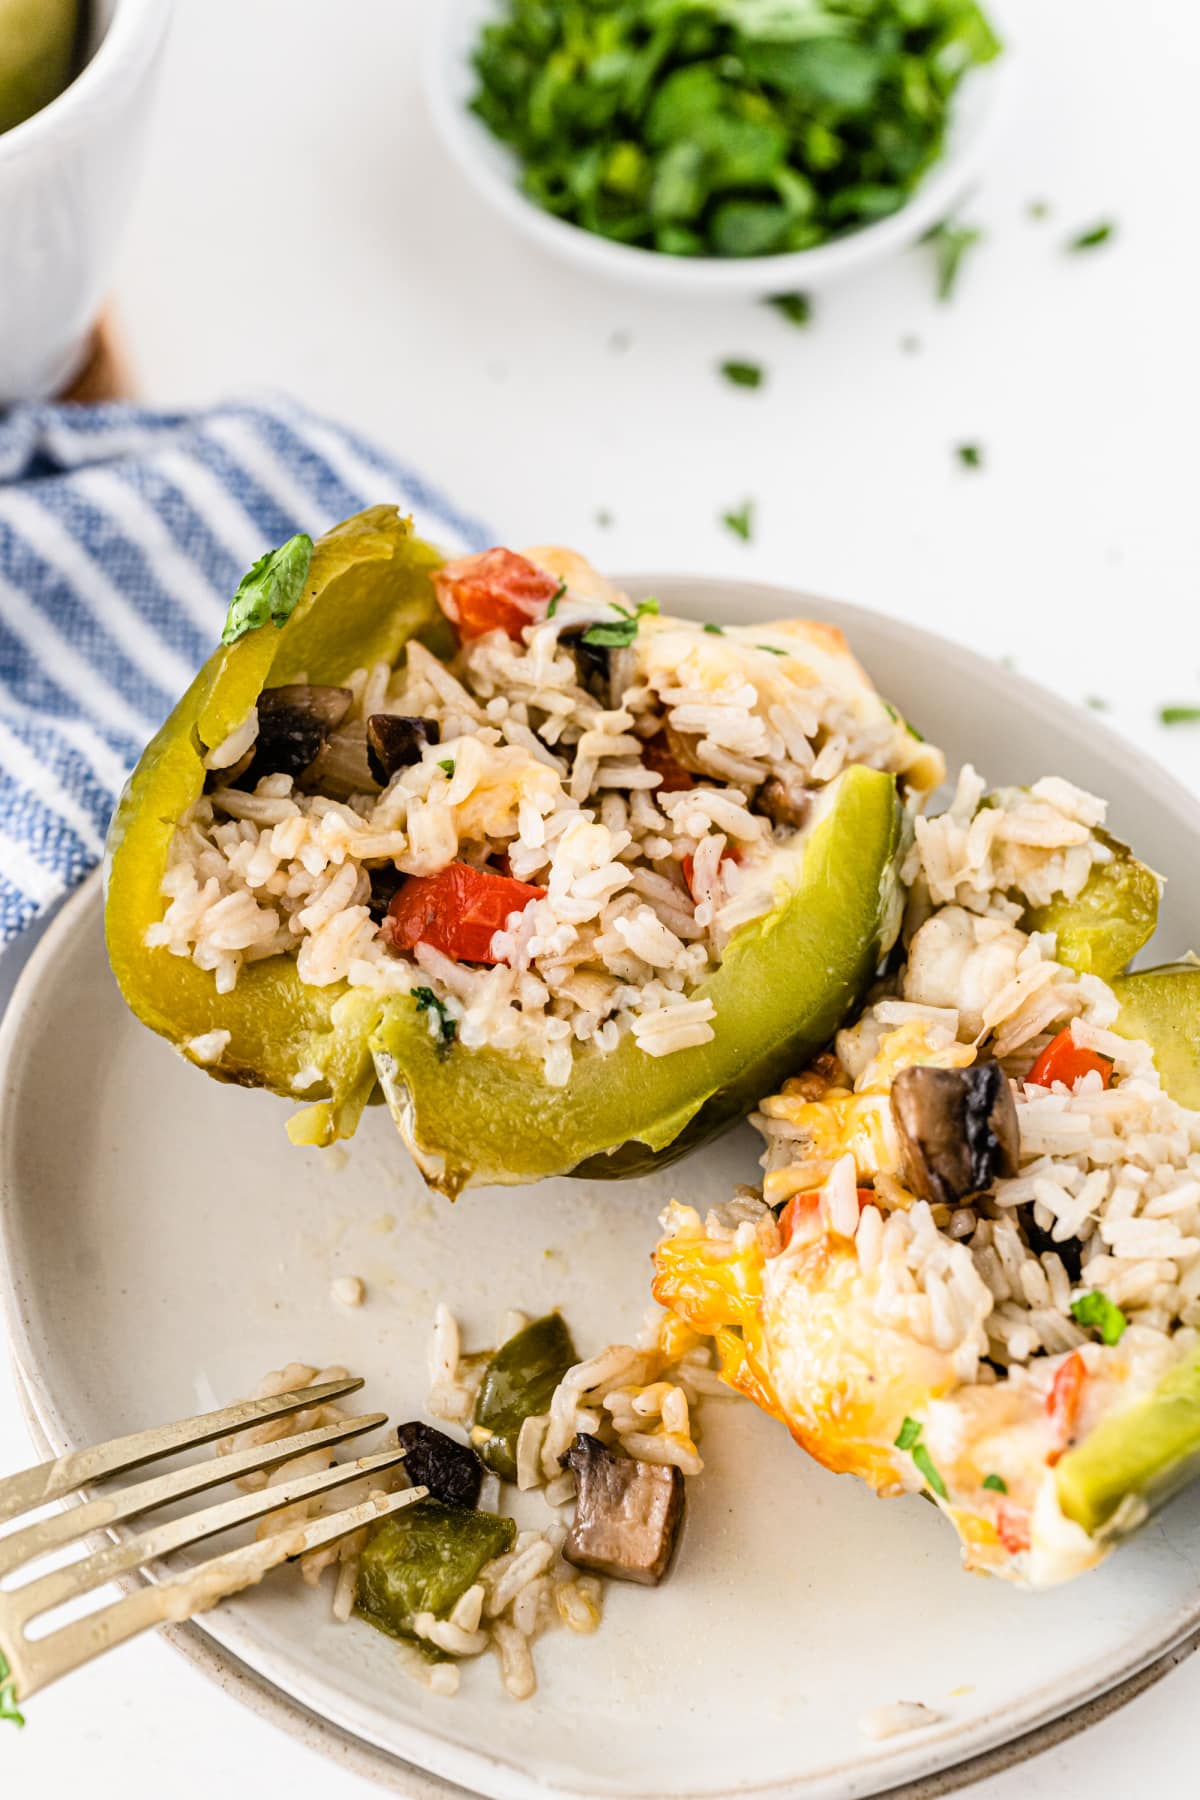 Stuffed green pepper with rice cut open on plate